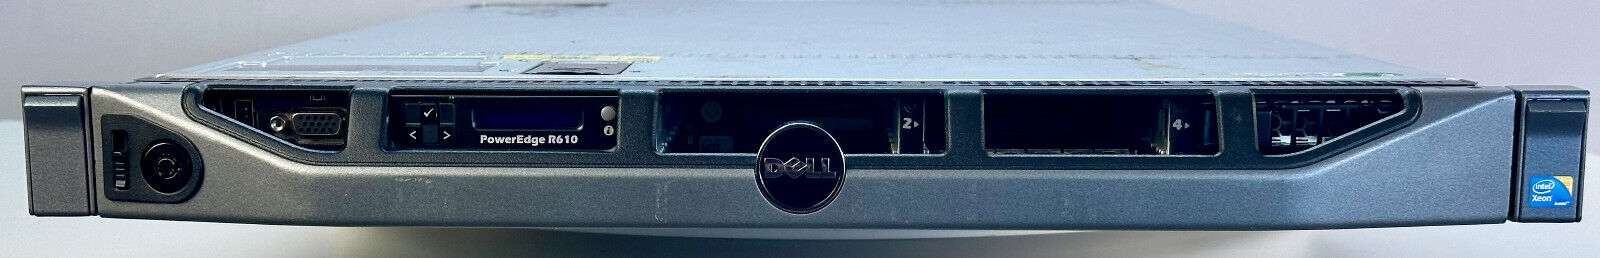 Dell PowerEdge r610 Server - 16gb - FibreChannel - Tested and Updated